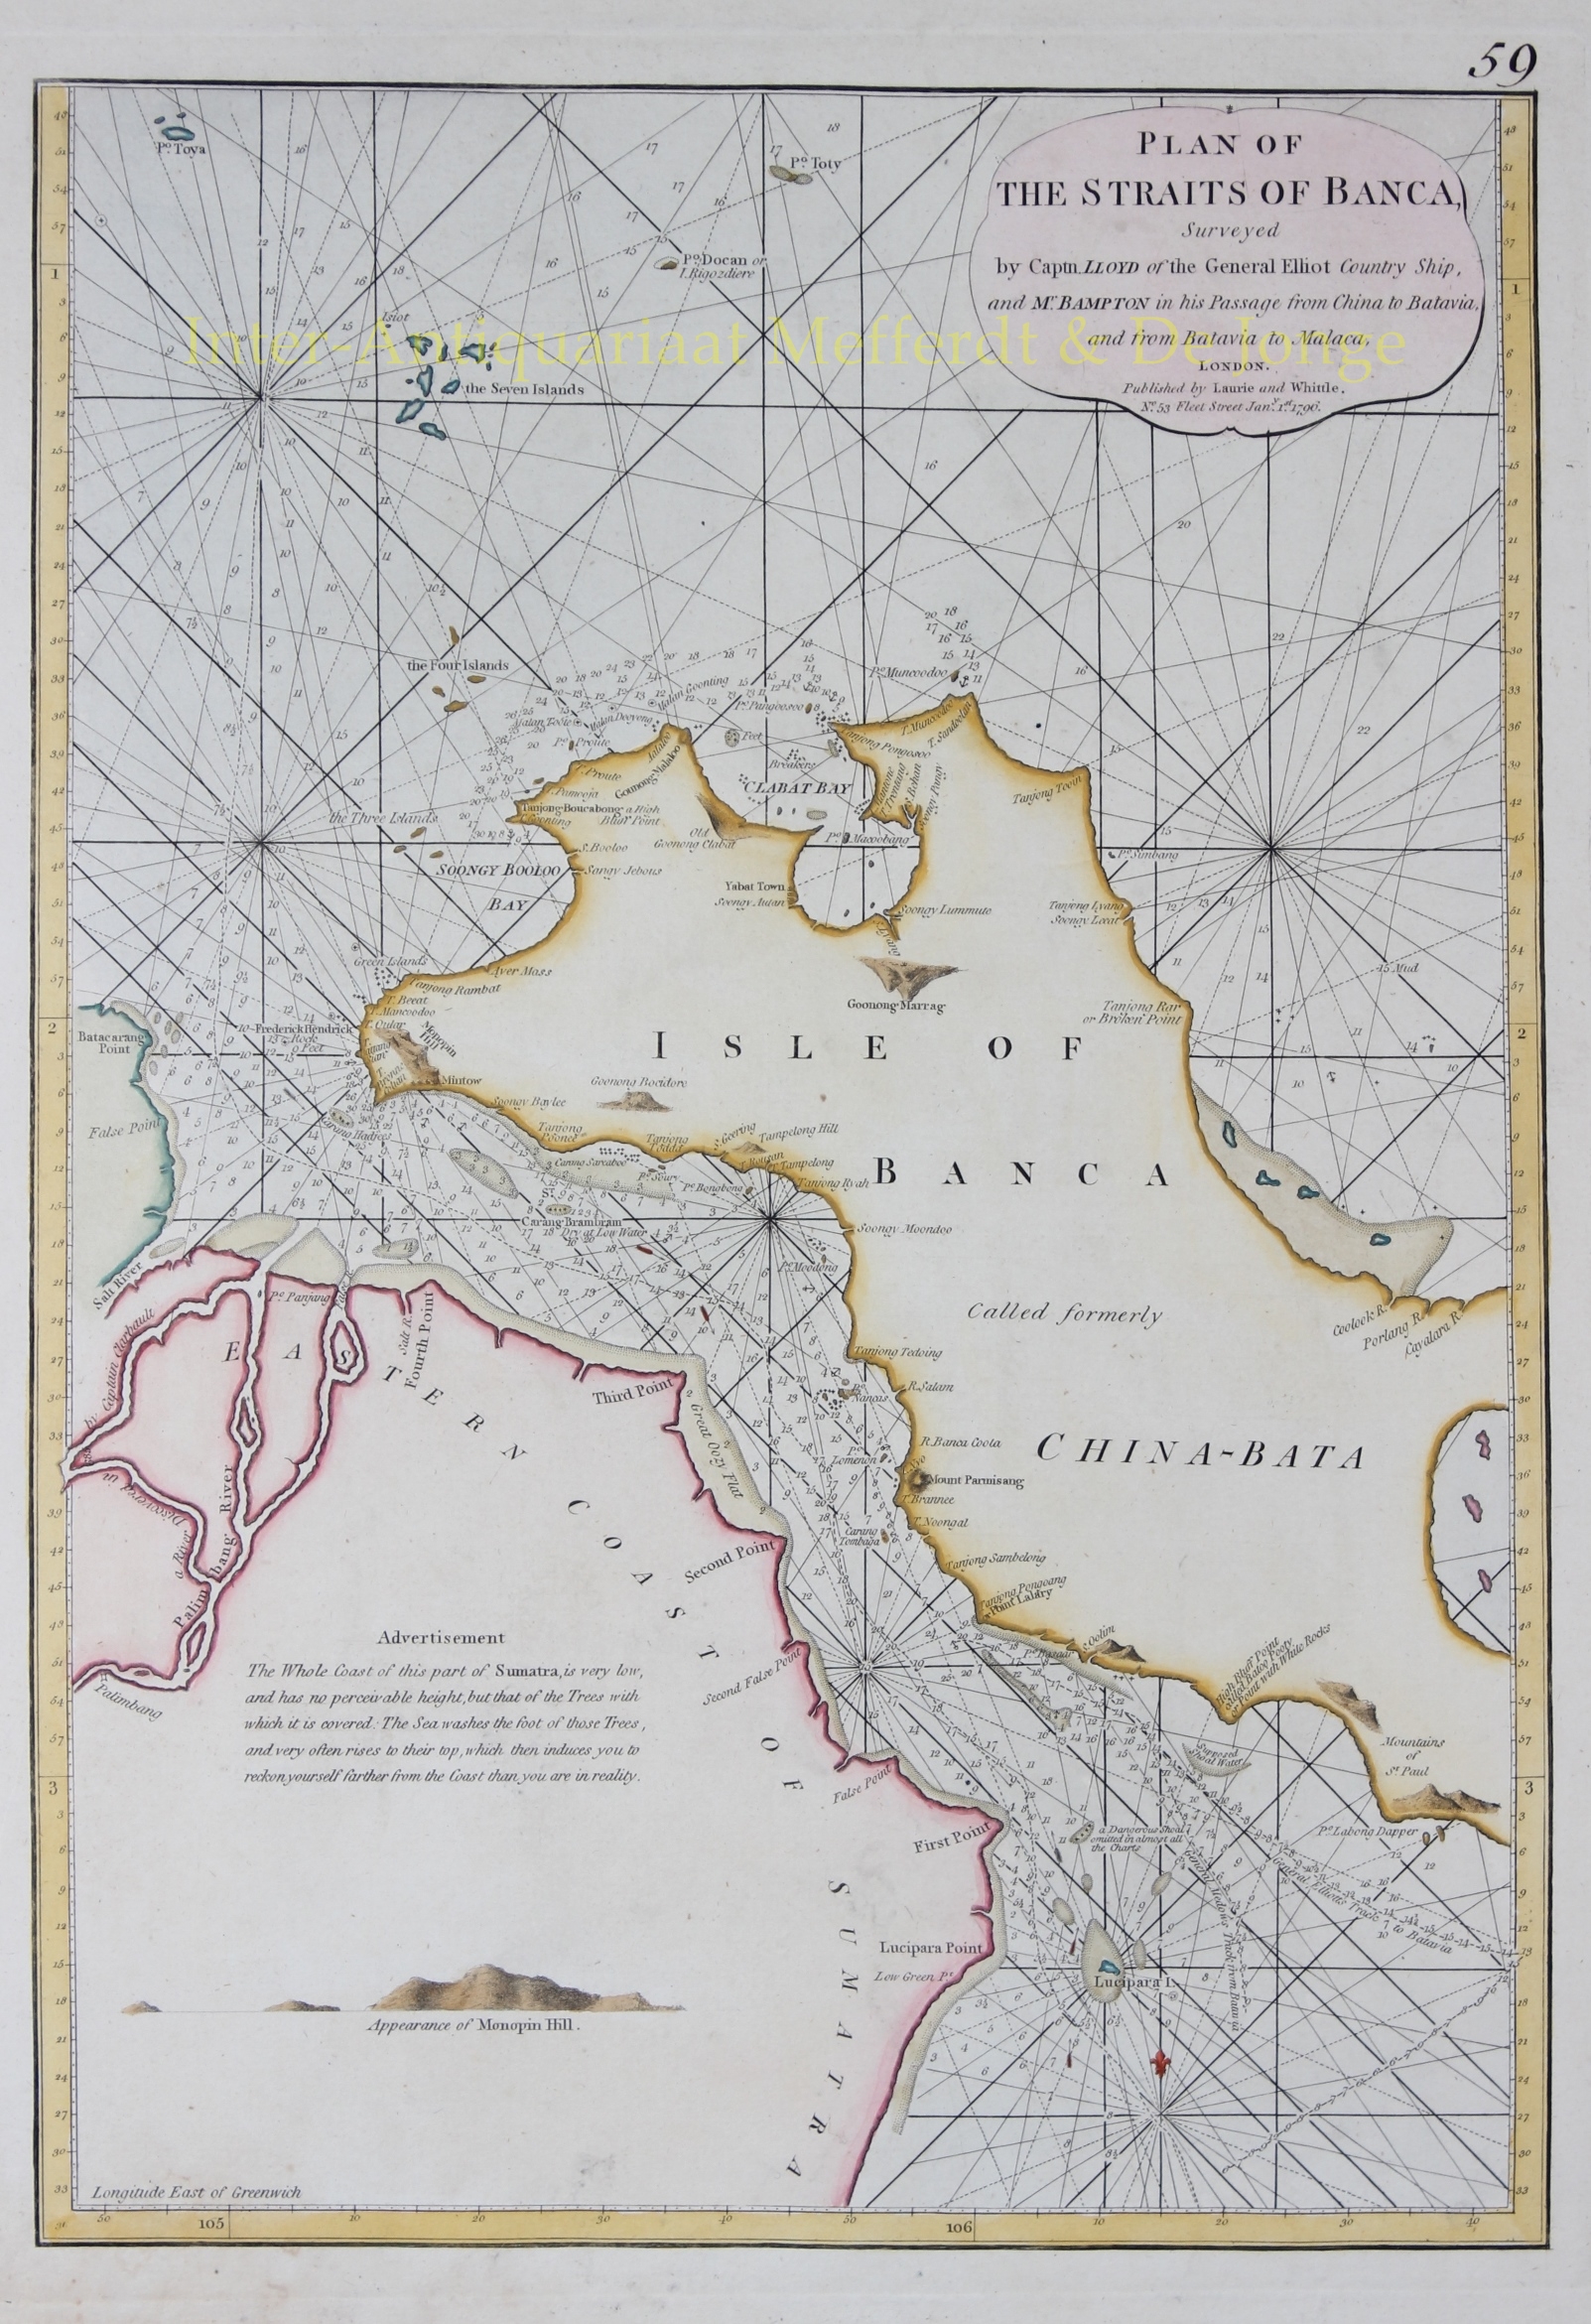 Laurie and Whittle - Indonesia, Straits of Banca - Laurie and Whittle, 1796